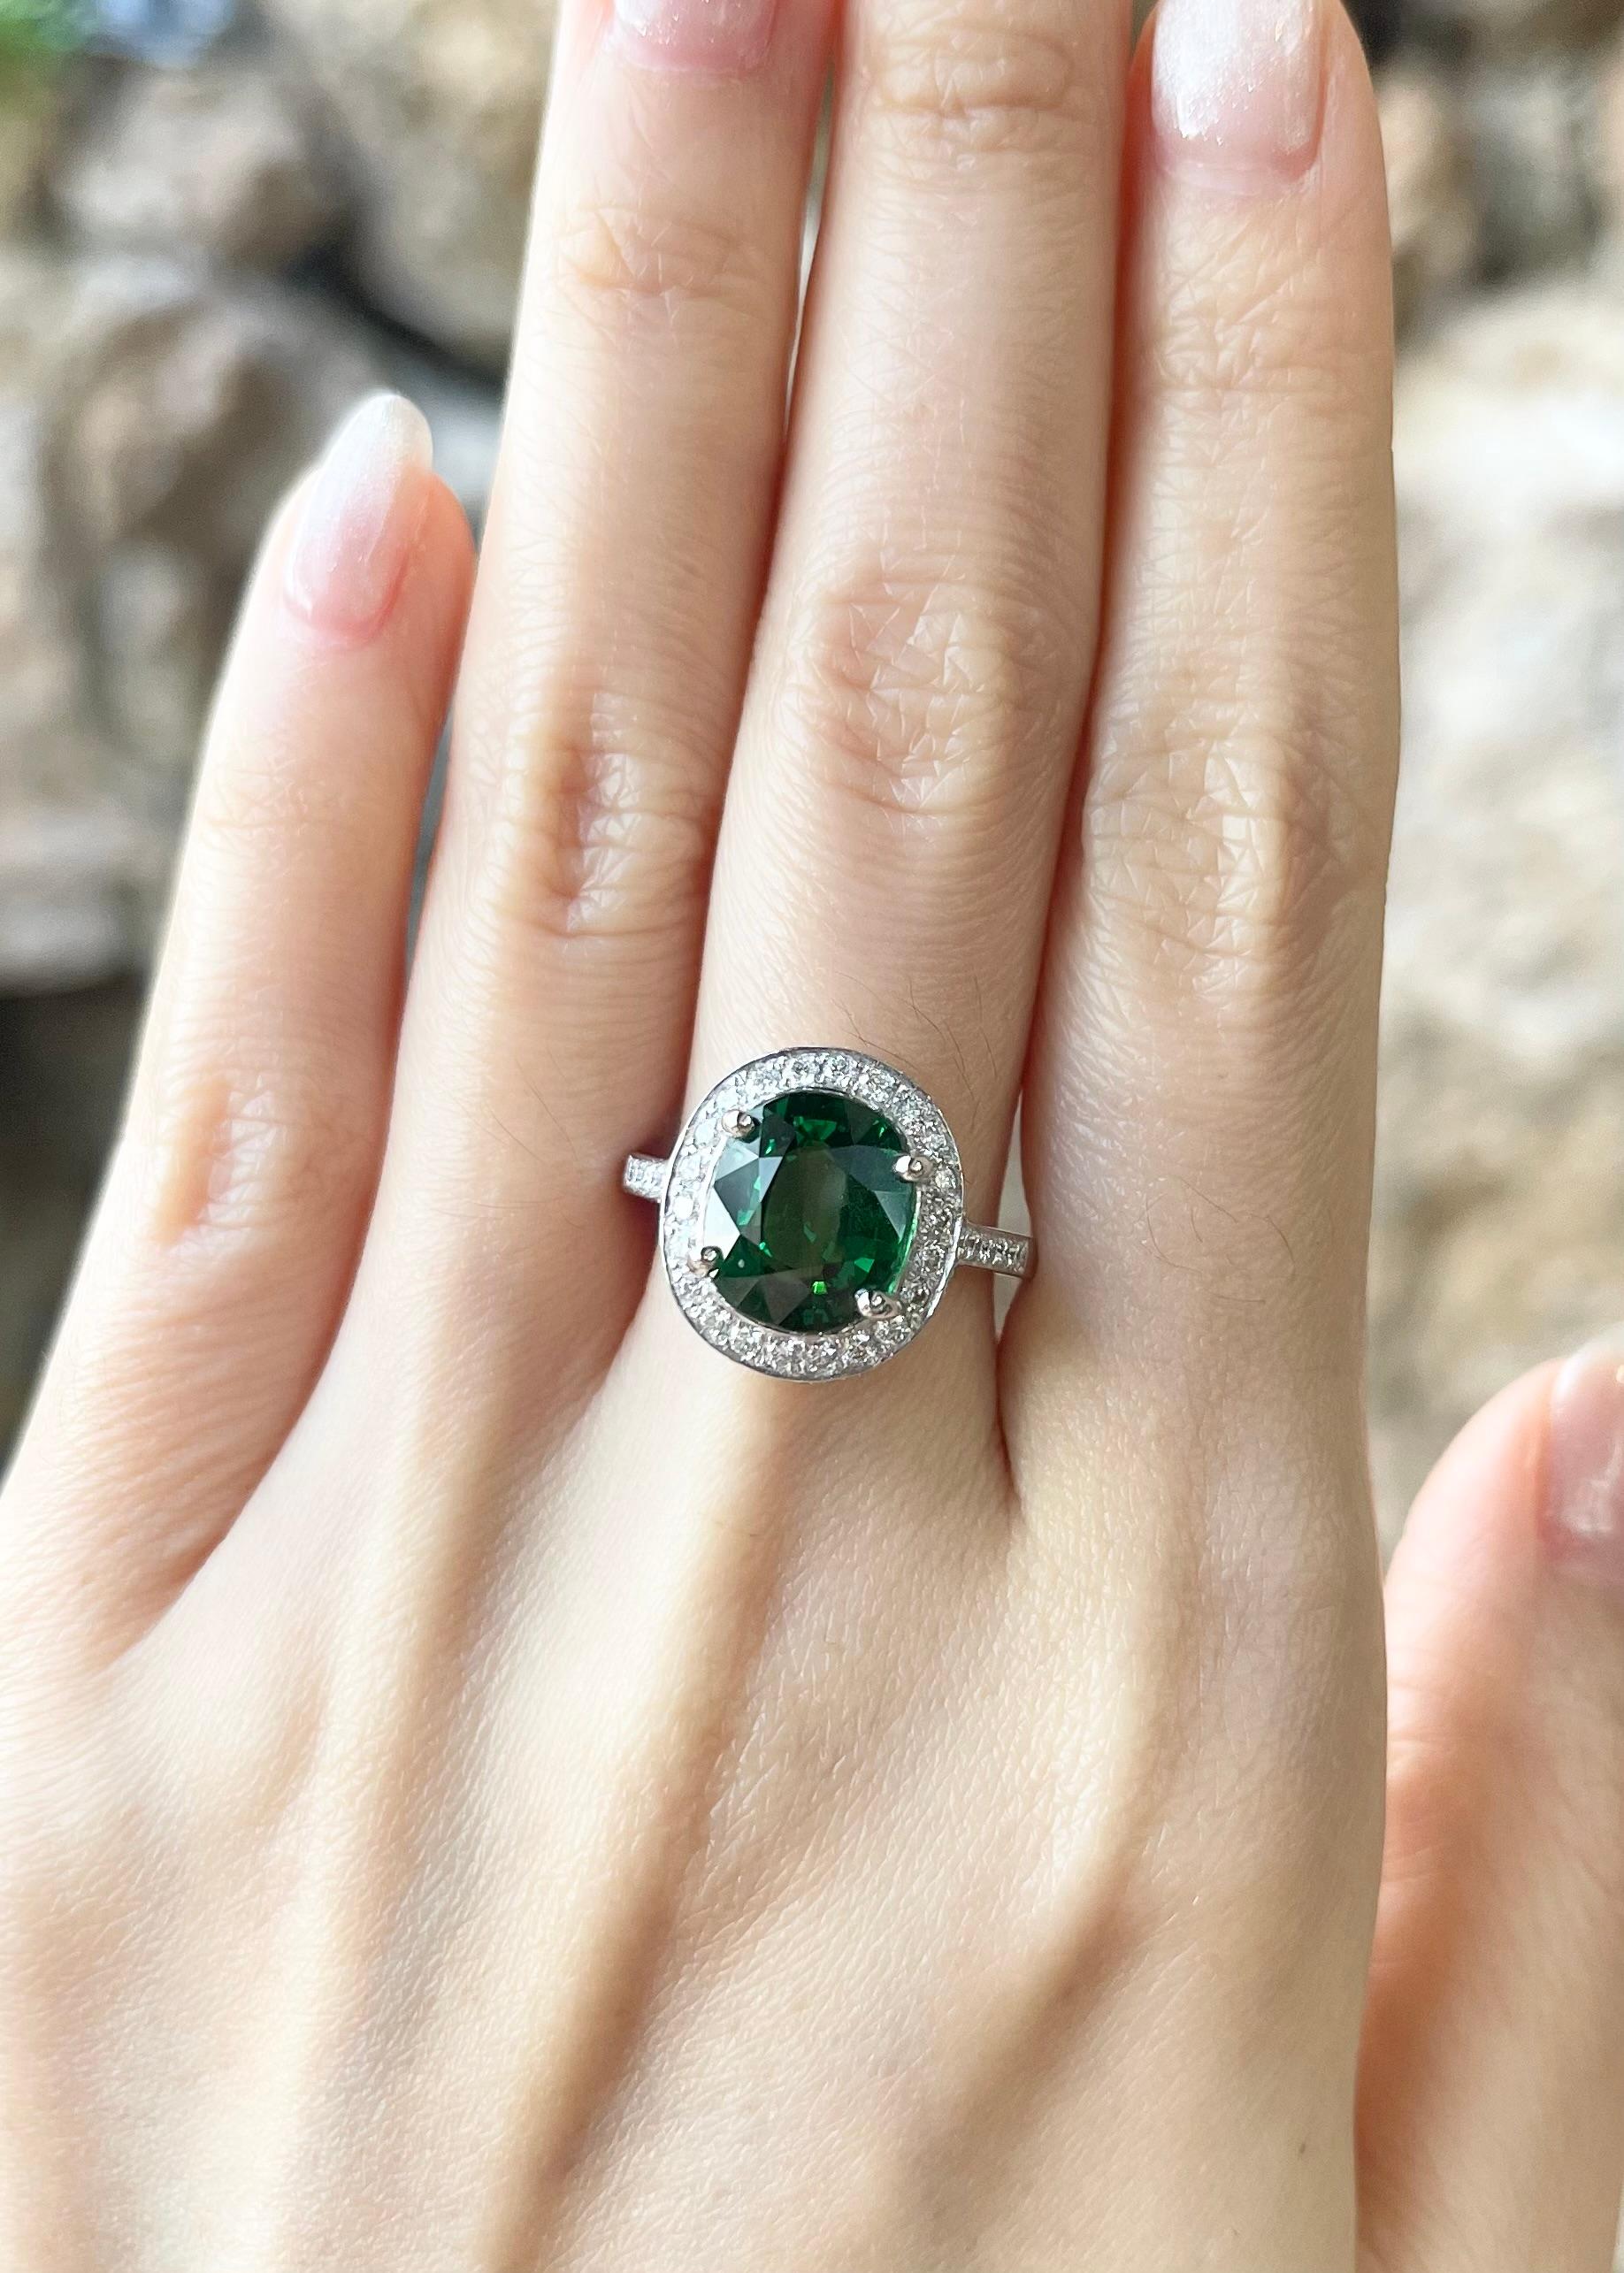 Tsavorite 5.13 carats with Diamond 0.57 carat Ring set in Platinum 950 Settings

Width:  1.3 cm 
Length: 1.6 cm
Ring Size: 53
Total Weight: 10.17 grams

